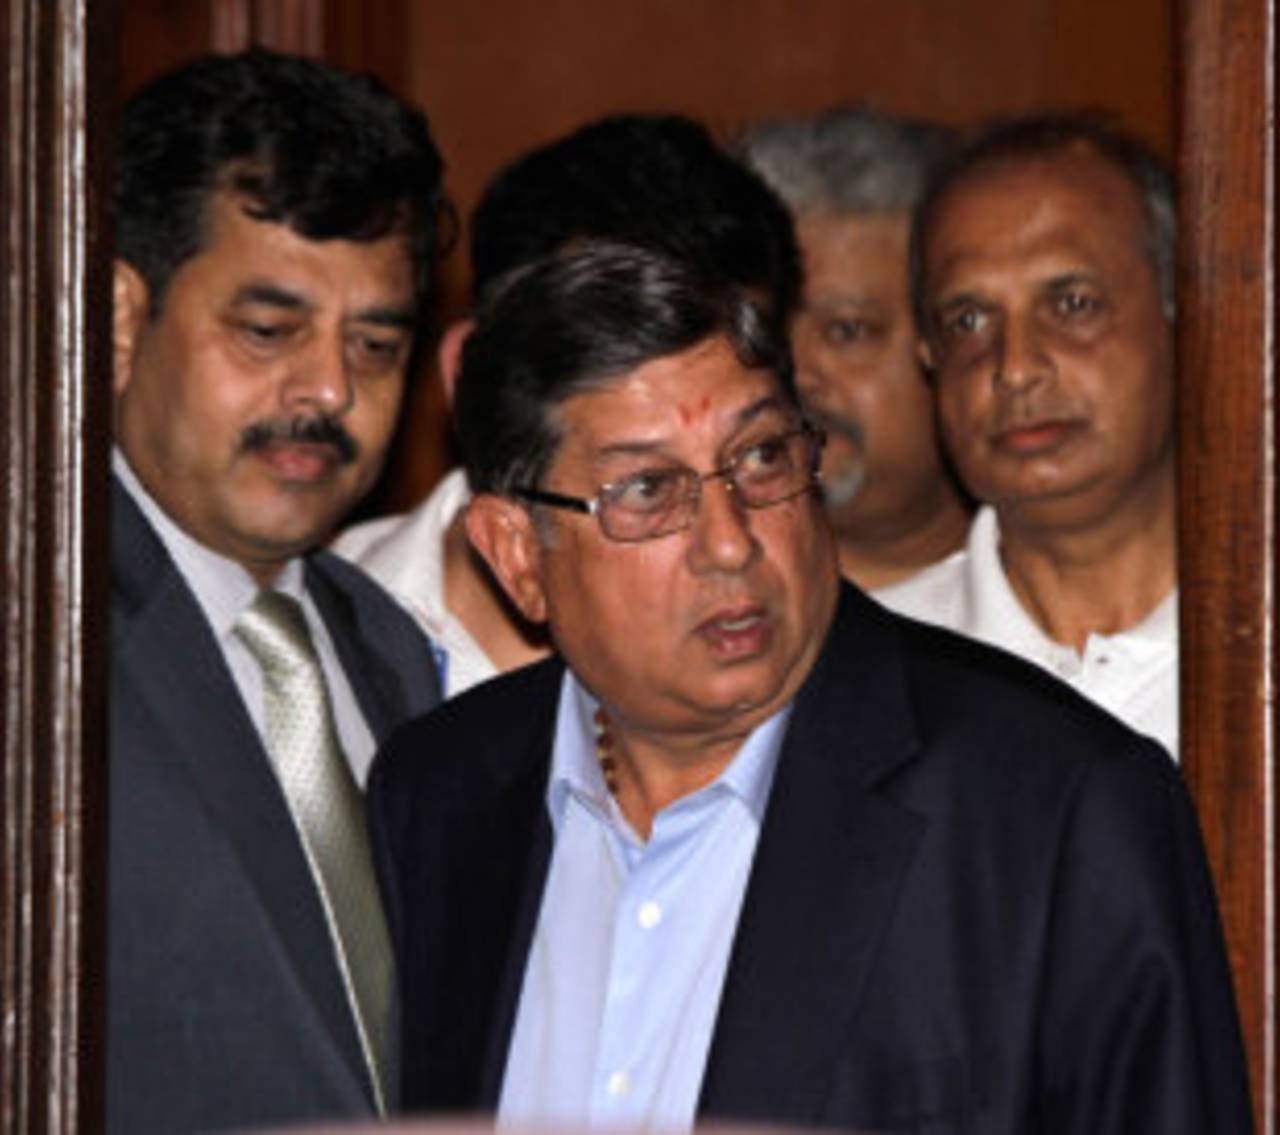 Cricket Association of Bihar secretary Aditya Verma has seemingly placed another obstacle in front of N Srinivasan's bid for another term as BCCI president&nbsp;&nbsp;&bull;&nbsp;&nbsp;Associated Press